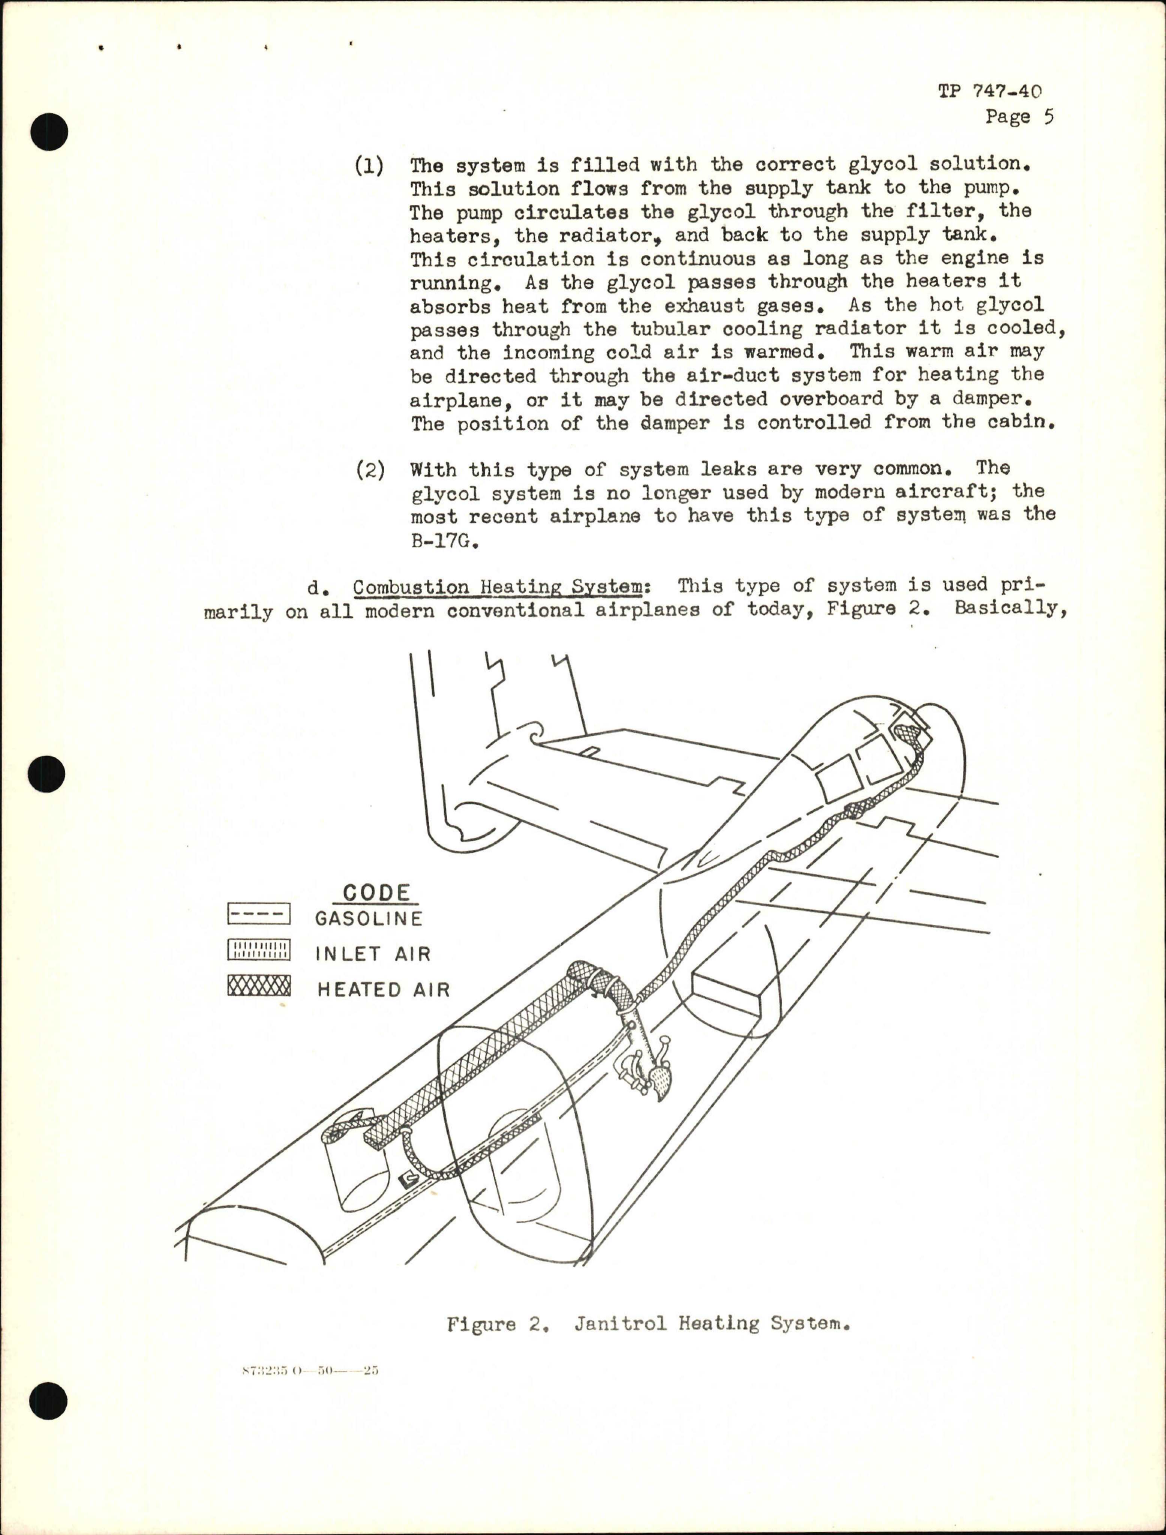 Sample page 5 from AirCorps Library document: Training Project, Heating, Air Conditioning and Pressurization Systems